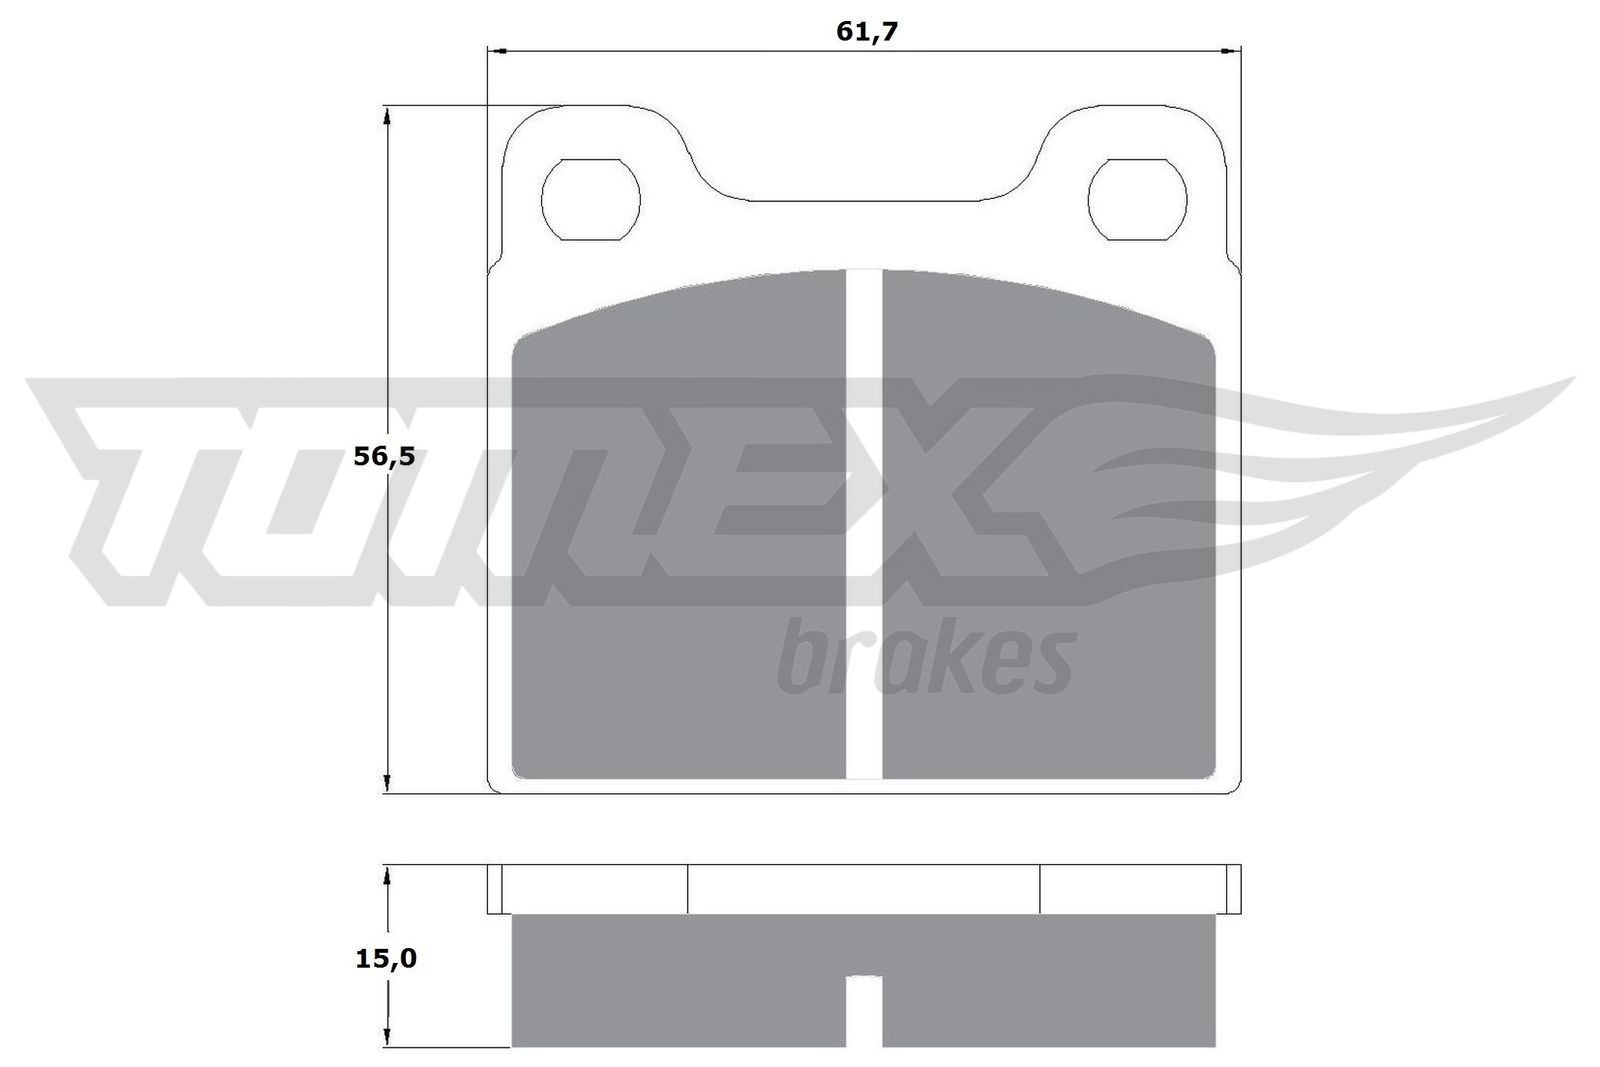 10-19 TOMEX brakes Height: 56,5mm, Width: 61,7mm, Thickness: 15mm Brake pads TX 10-19 buy